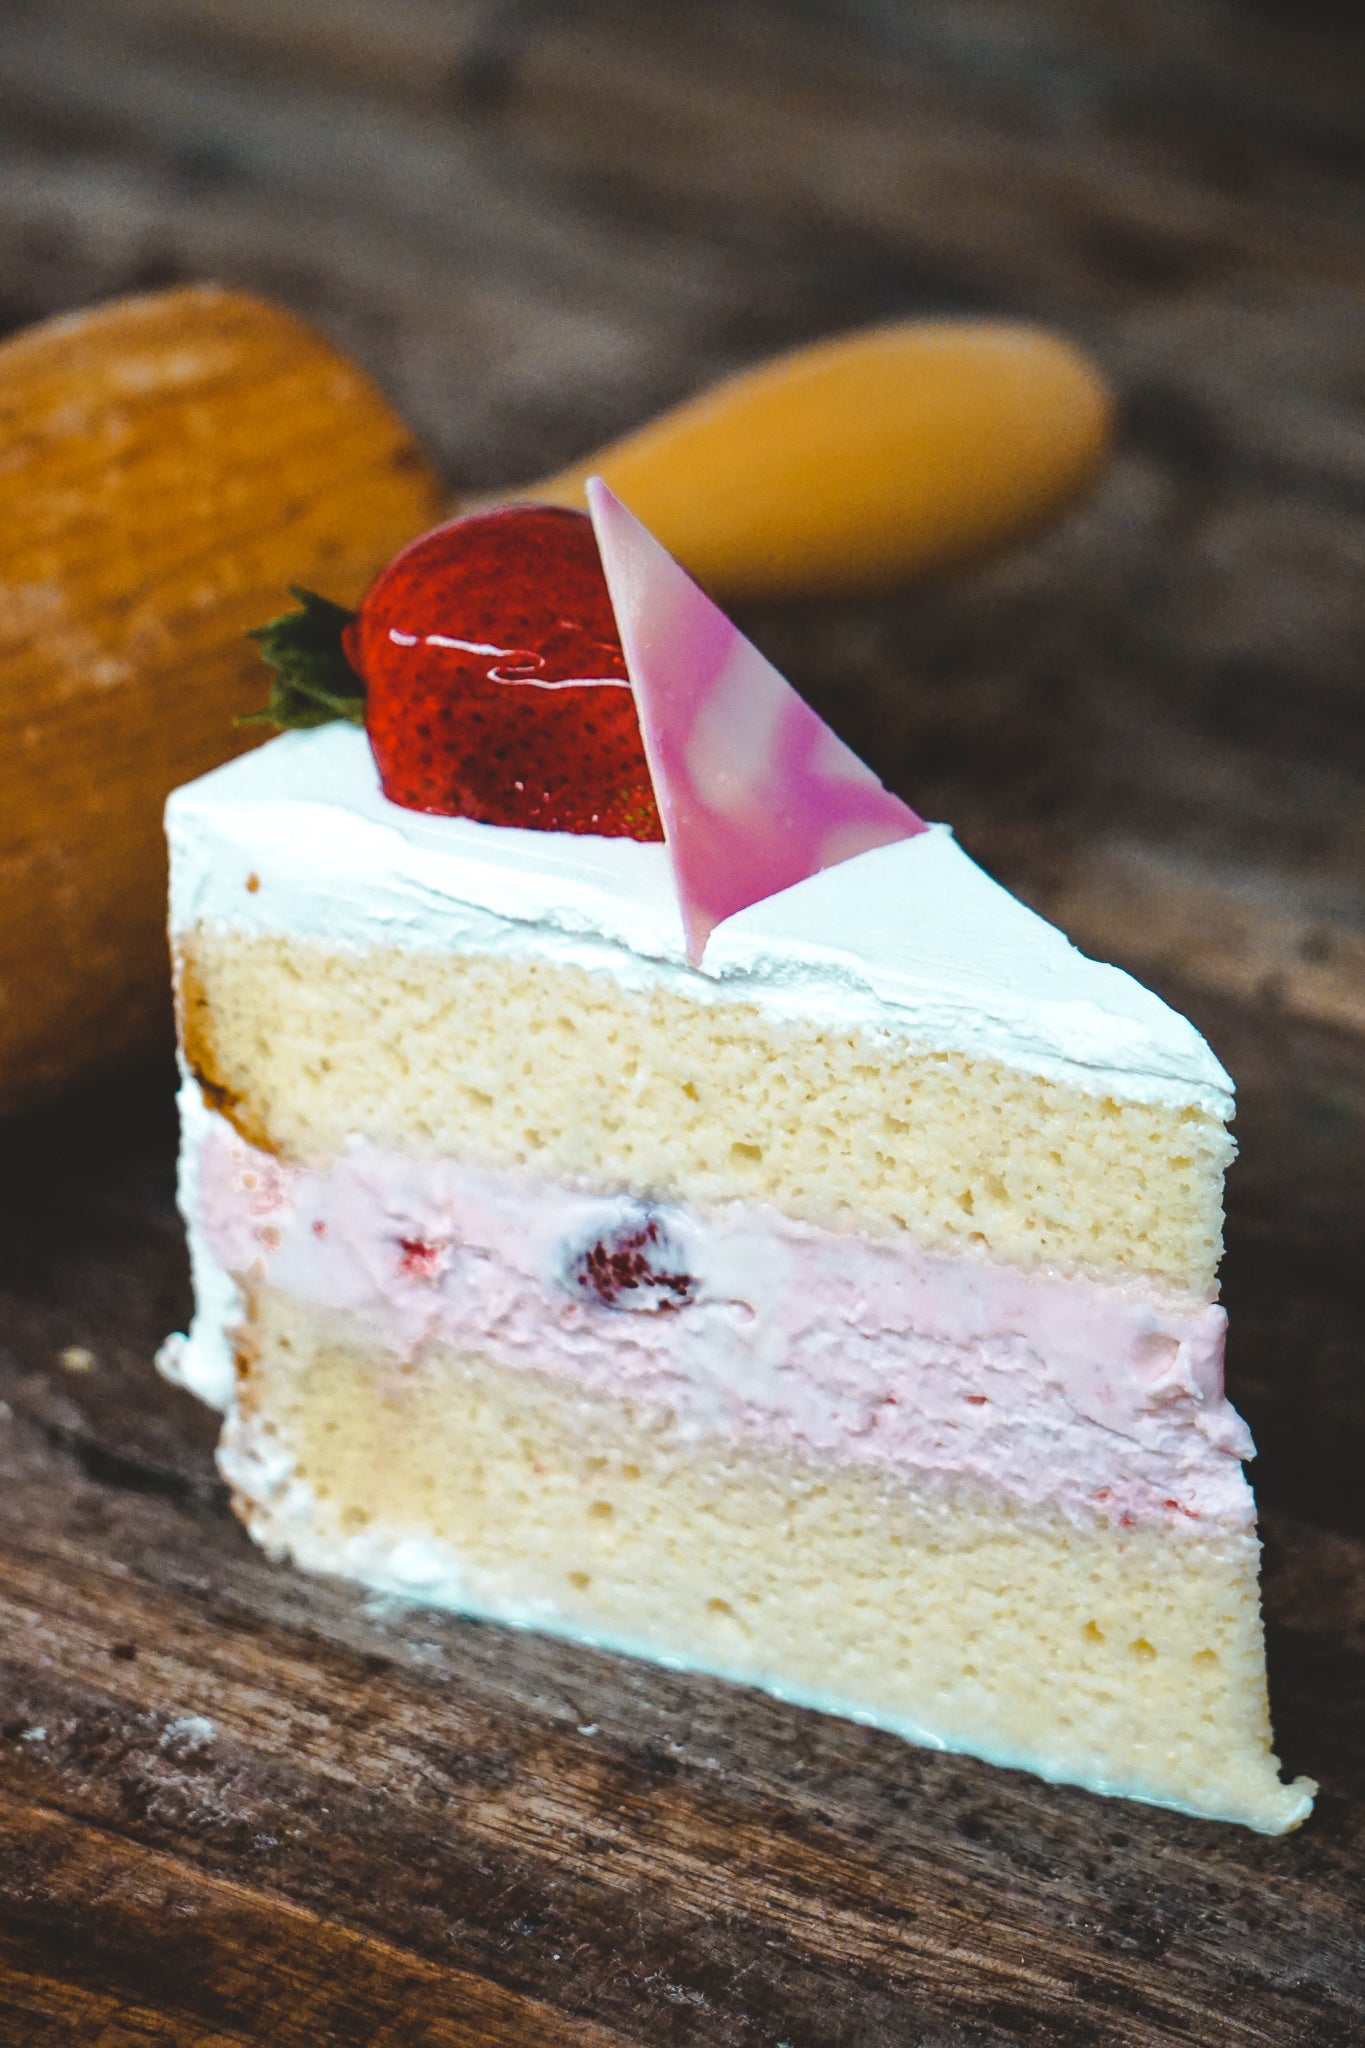 Strawberry Tres Leches